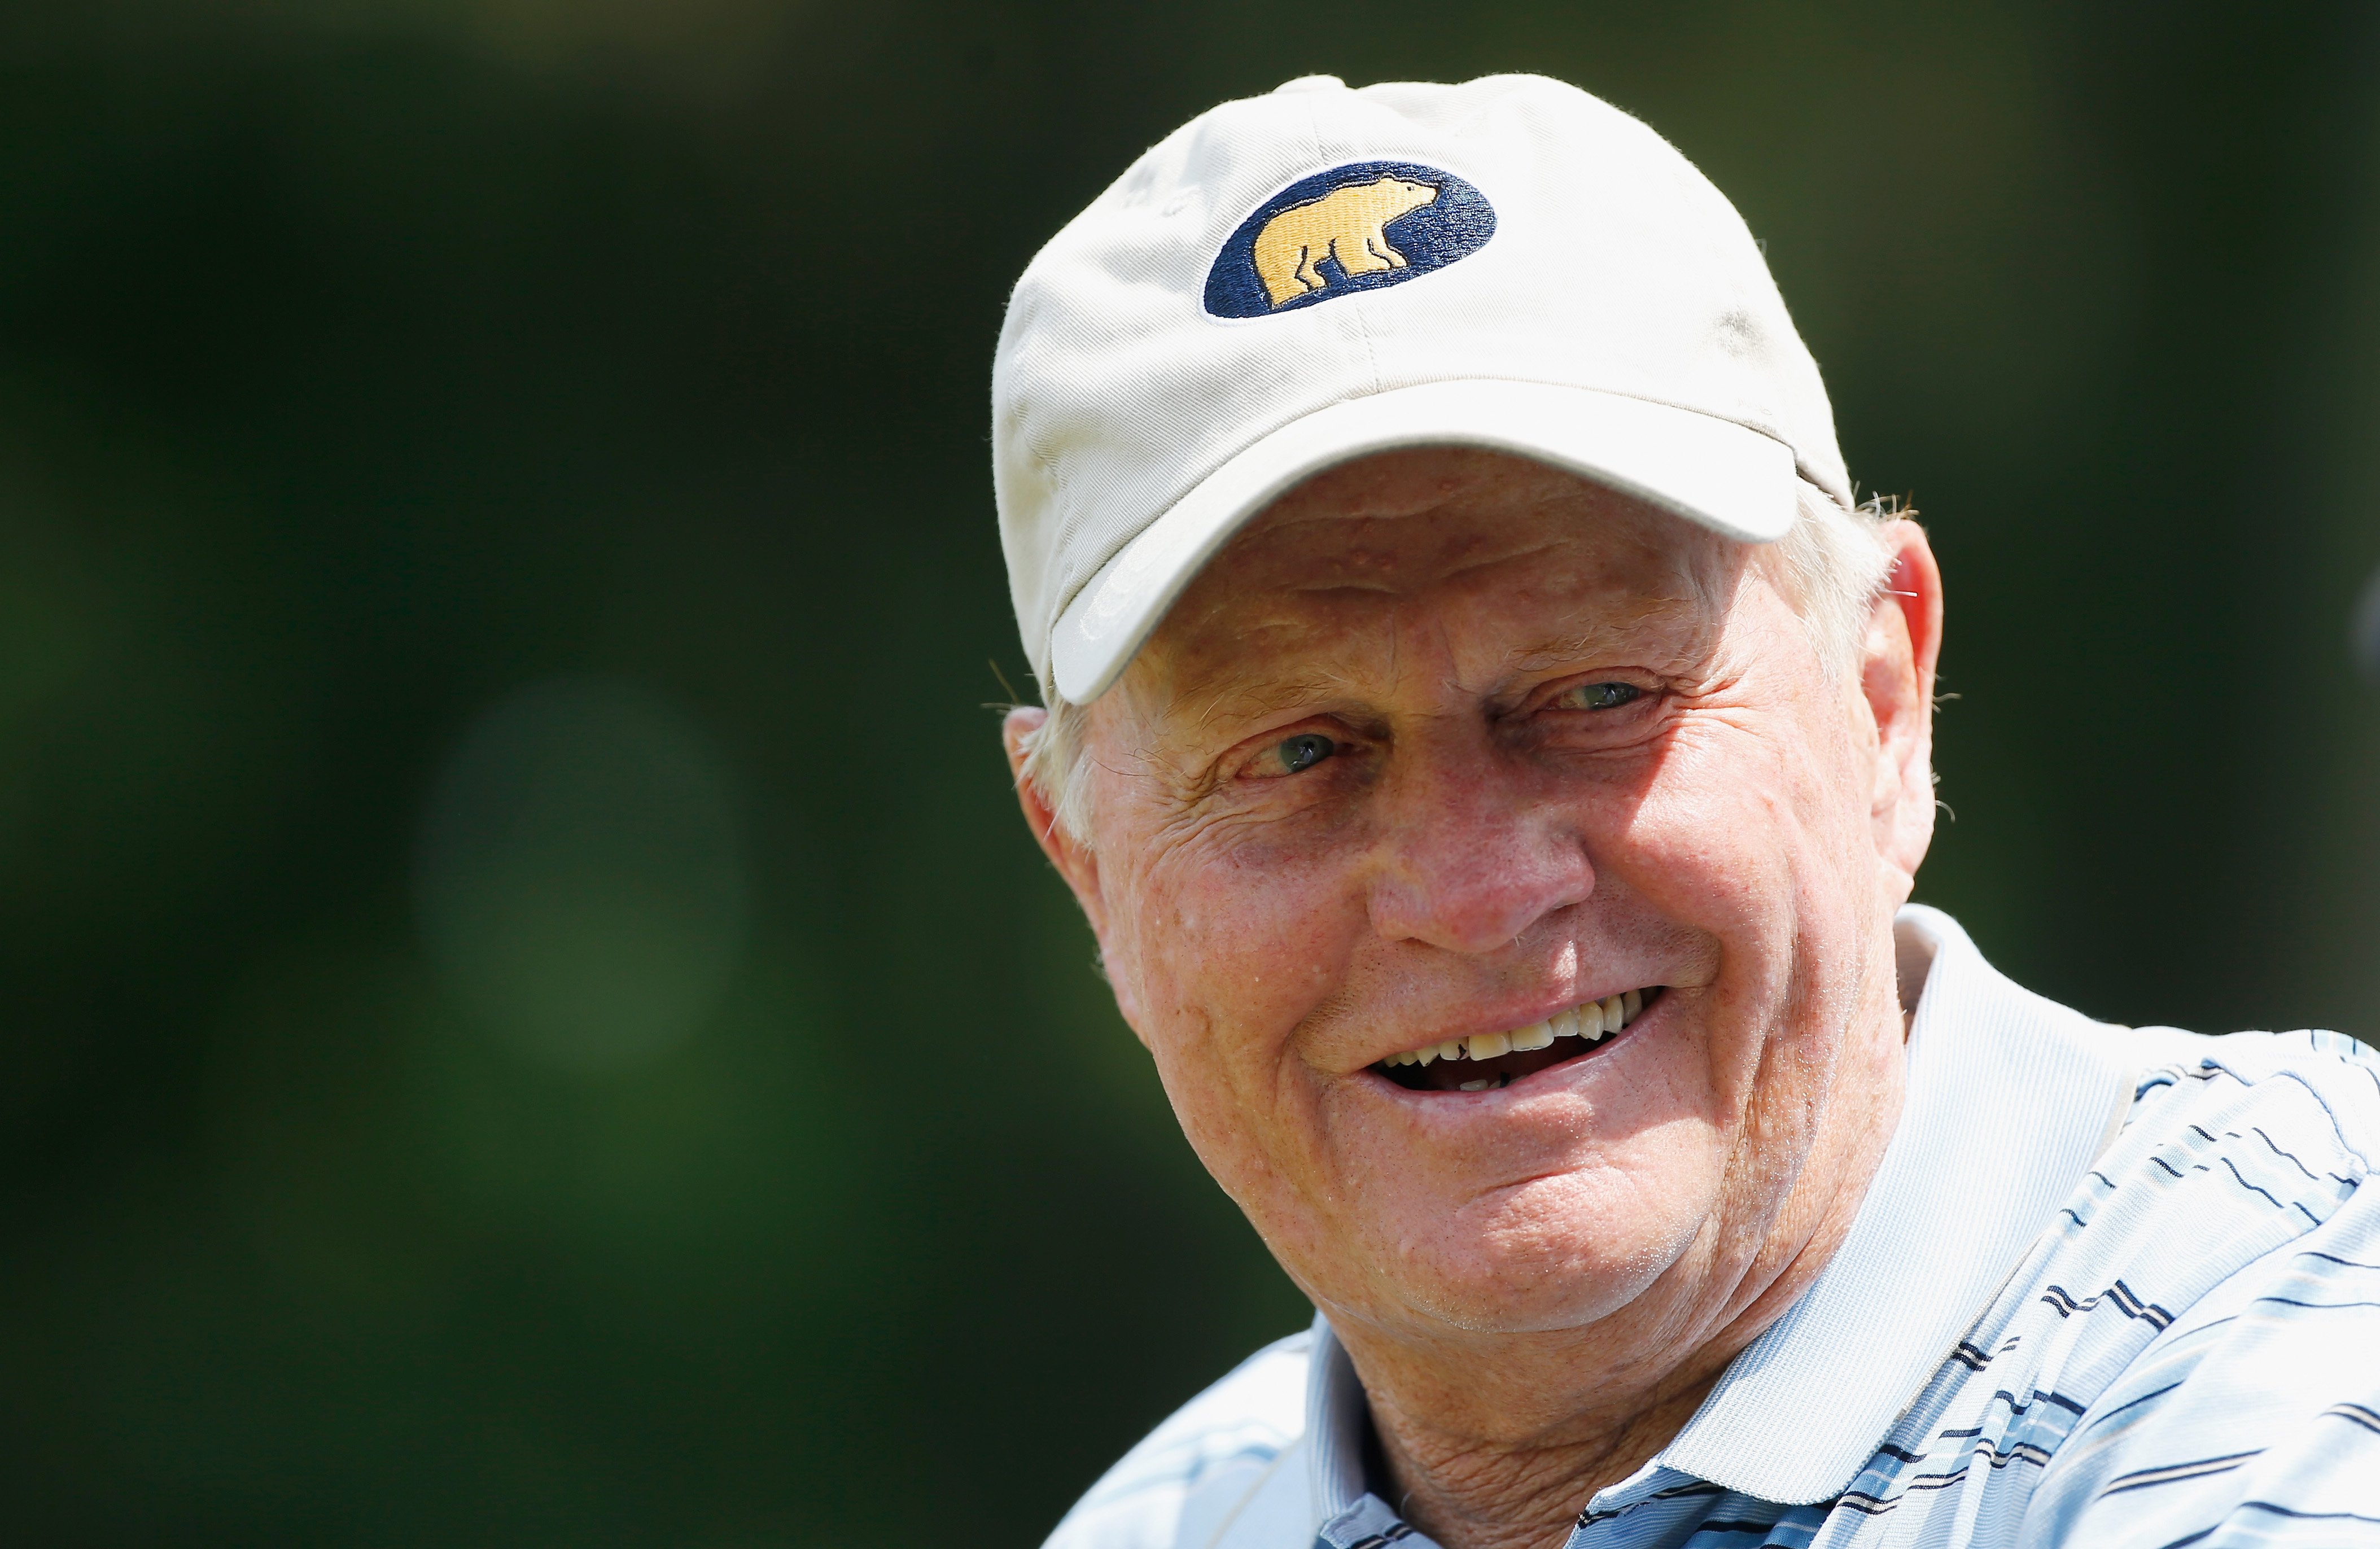 Nicklaus has a record 18 majors (Photo: Getty Images)